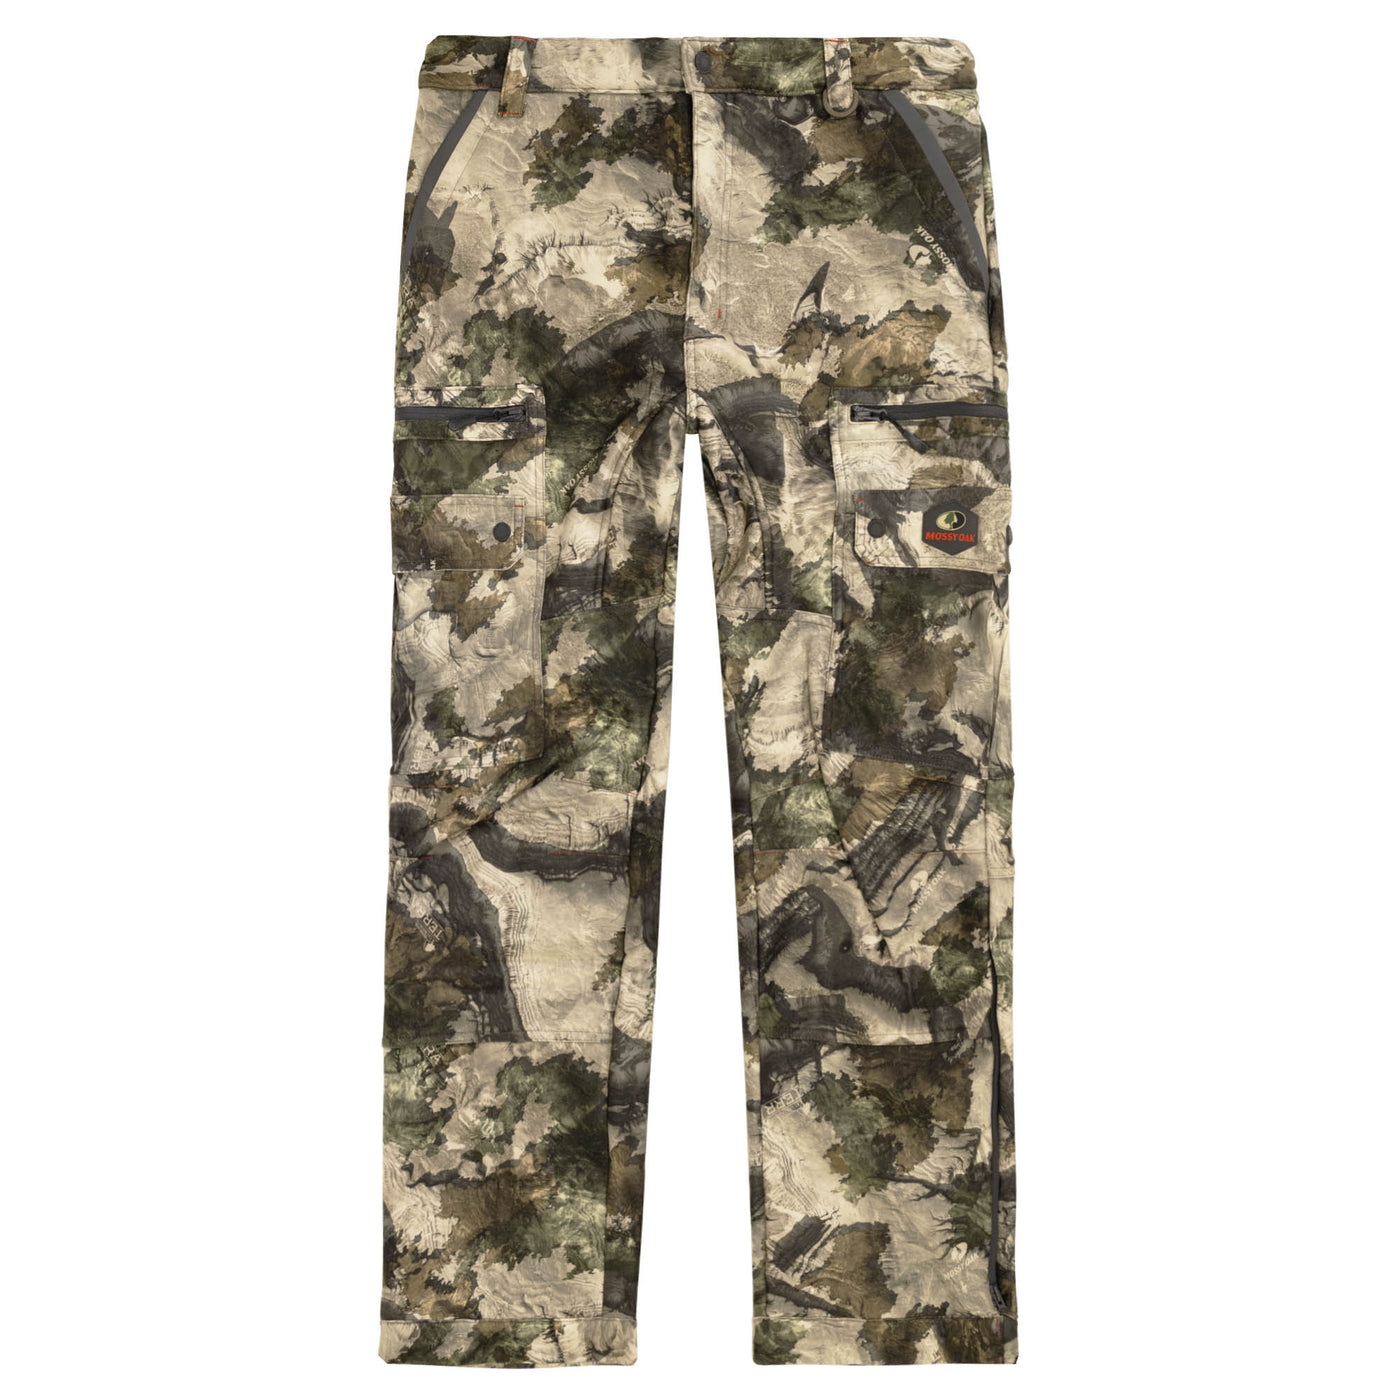 Mossy Oak Cotton Mill 2.0 Camo Hunting Pants for Men Camouflage